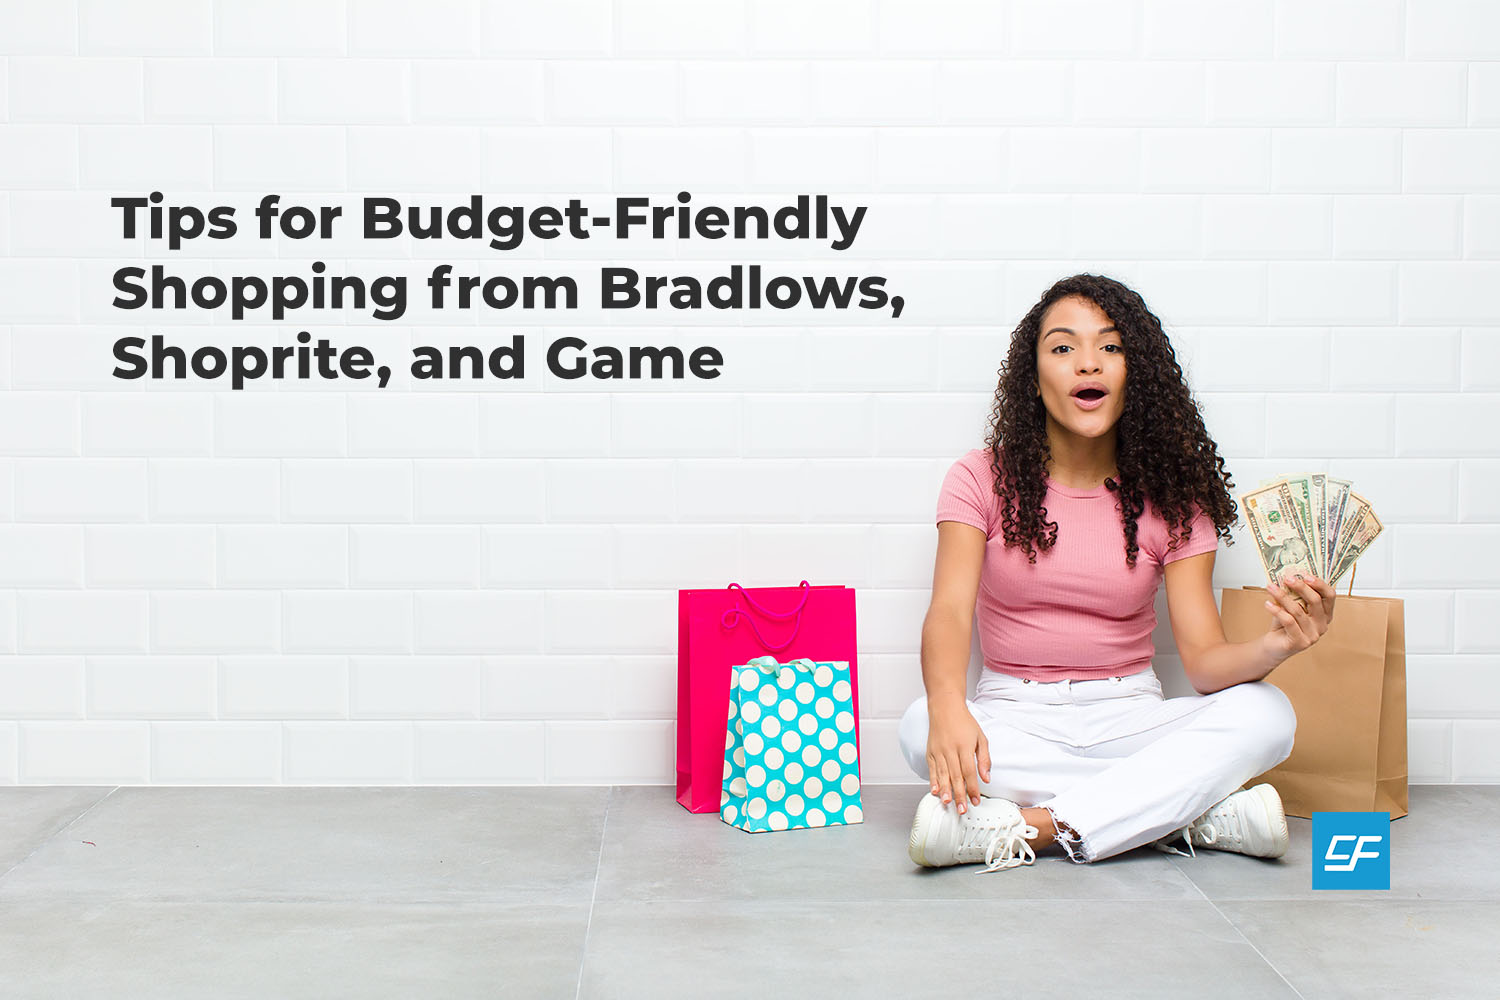 Shopping Tips from Bradlows, Shoprite, and Game